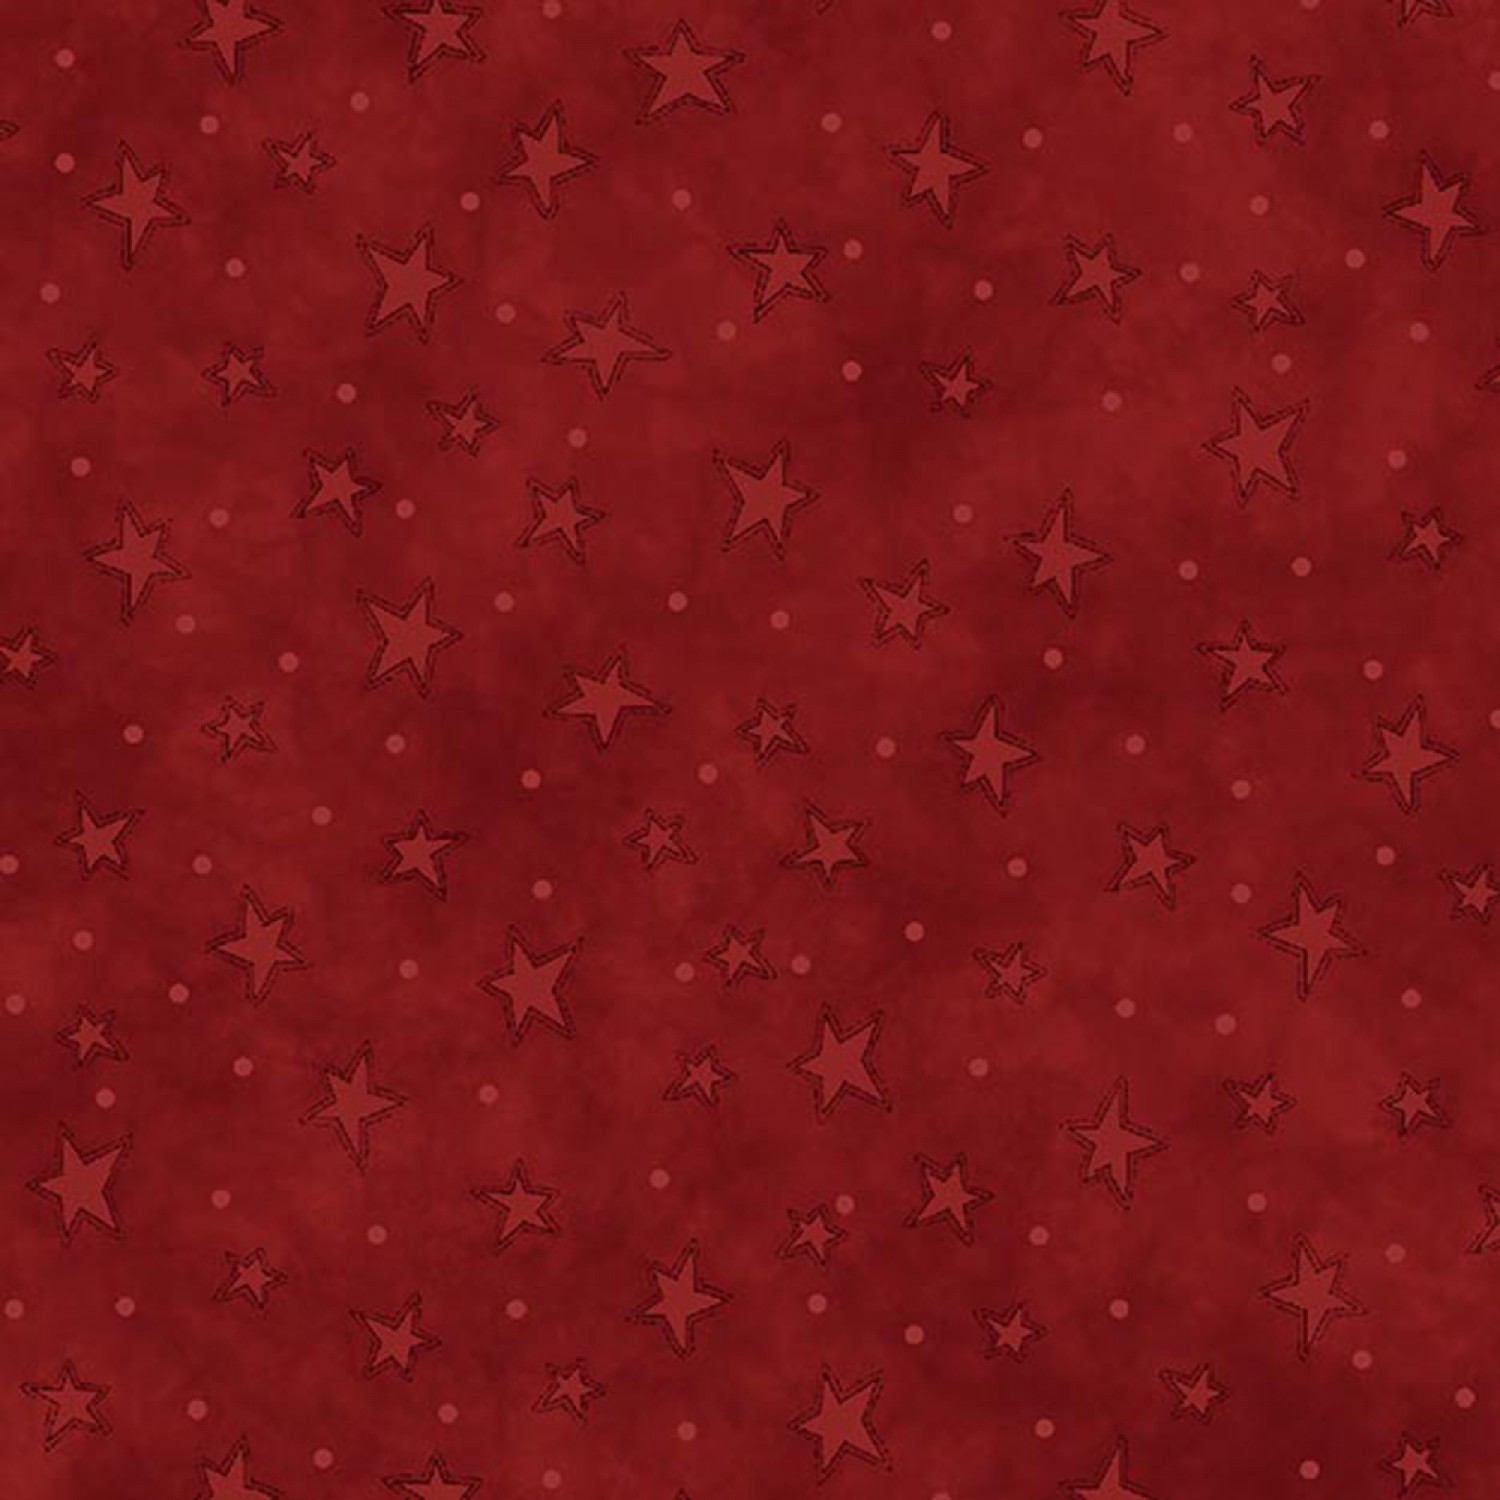 Red Starry Fabric